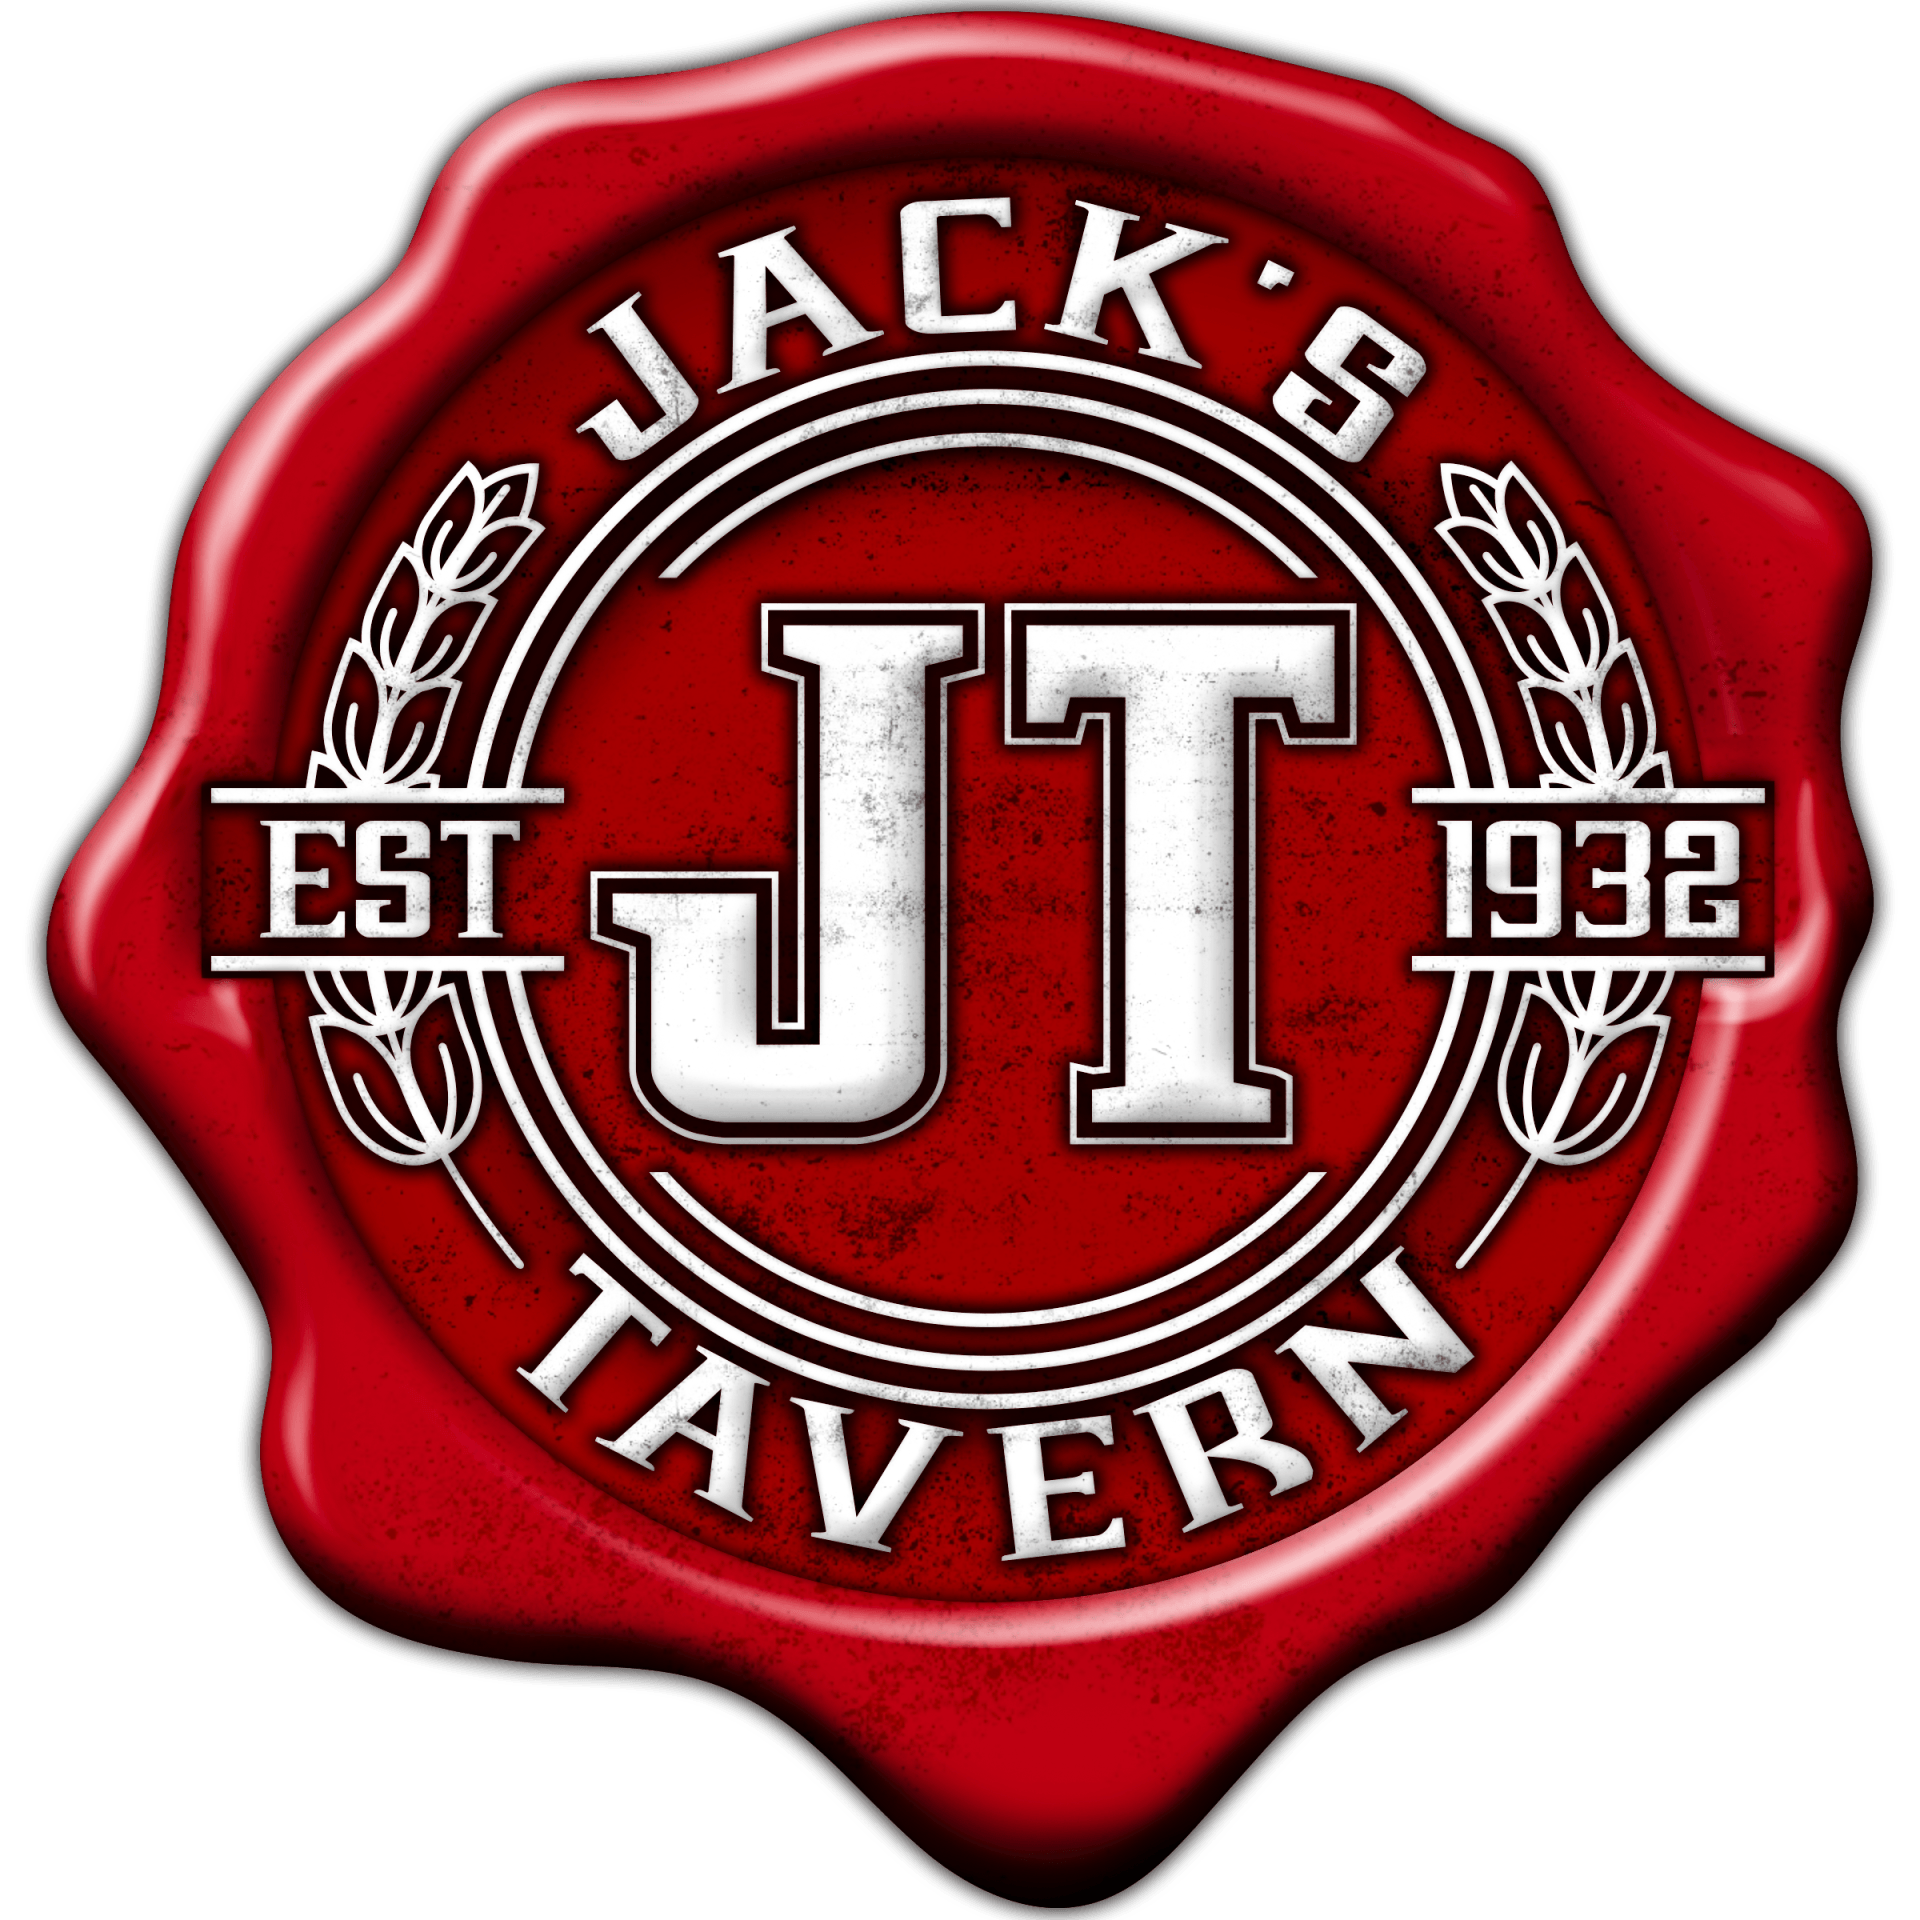 the logo for jack 's tavern was created in 1932